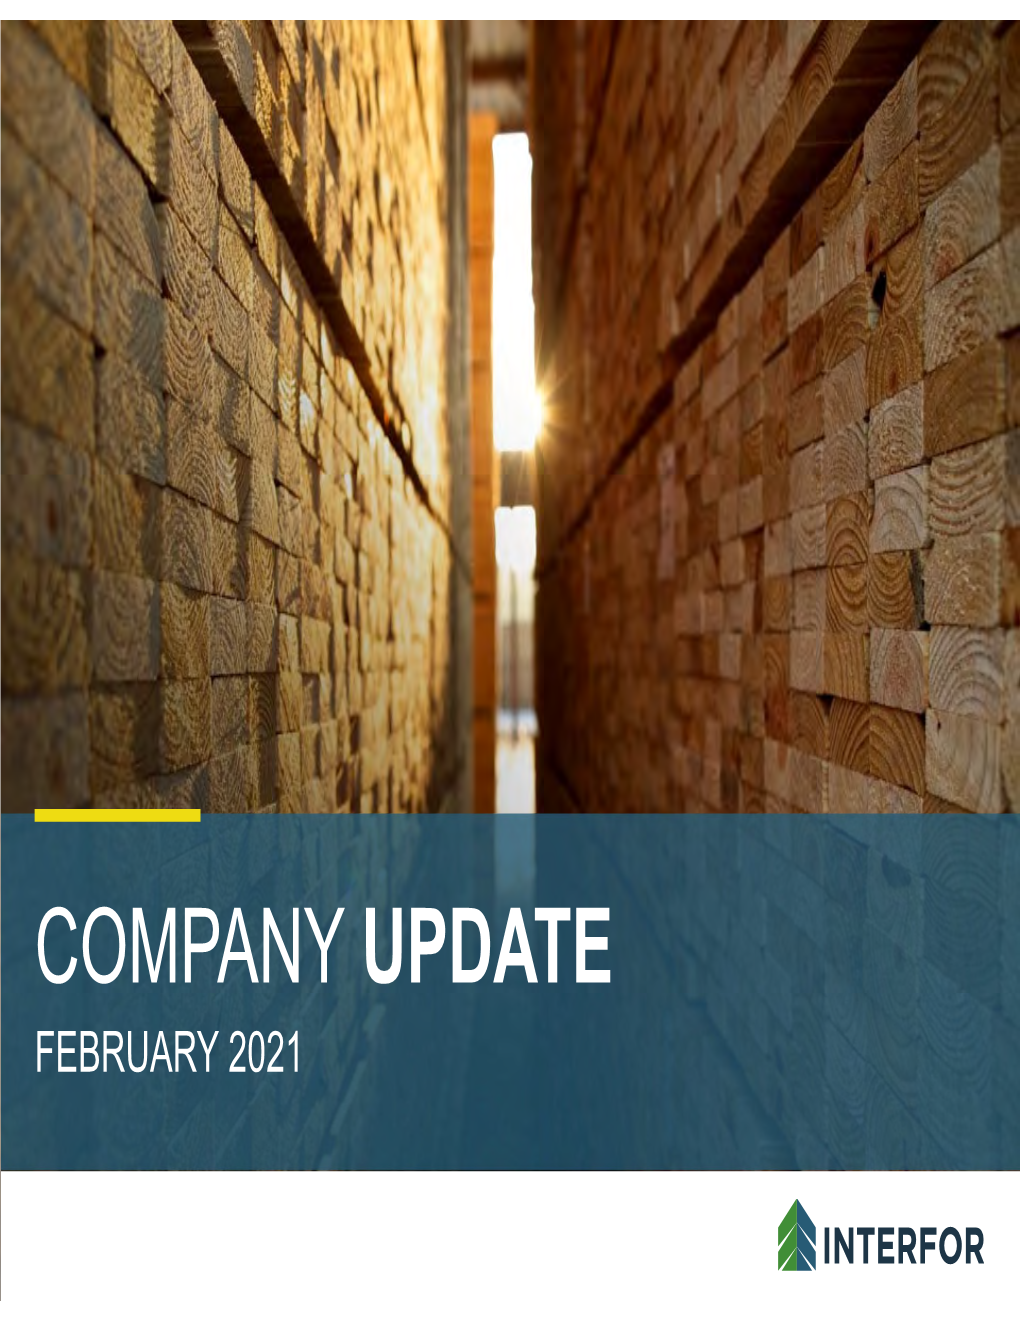 Company Update February 2021 Forward-Looking Information & Non-Gaap Measures